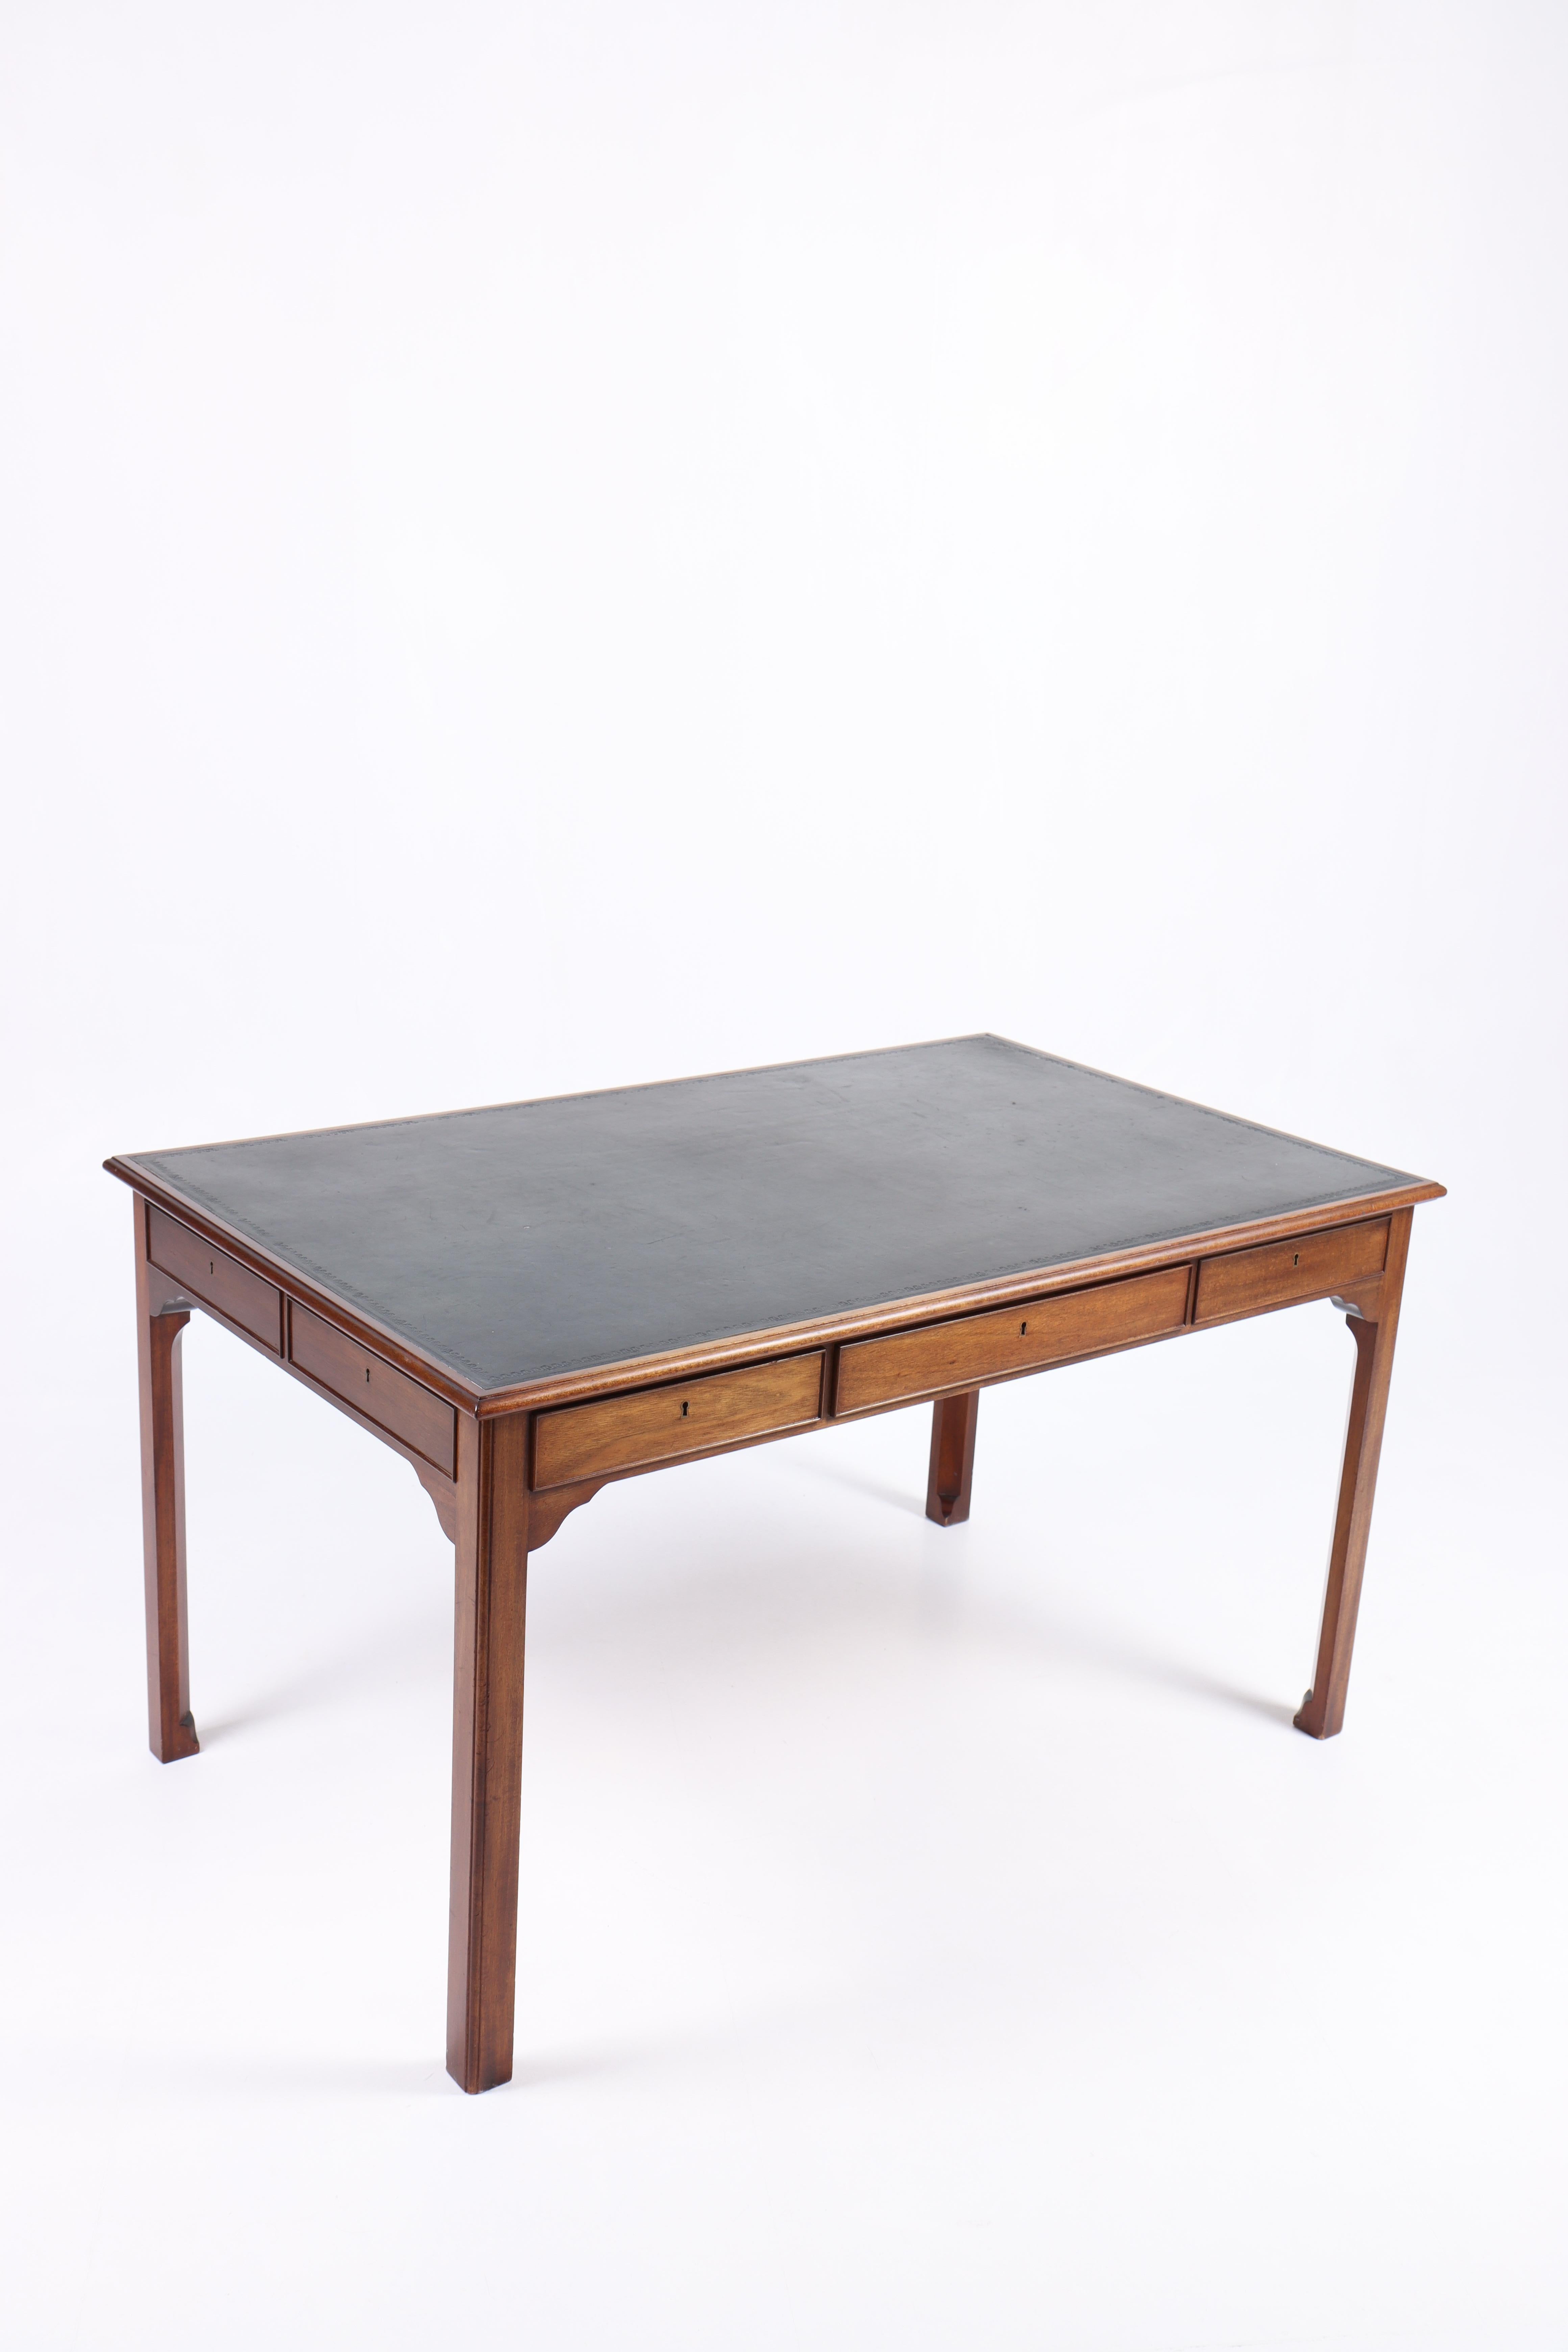 Danish Desk in Mahogany and Patinated Leather, Made in Denmark, 1950s